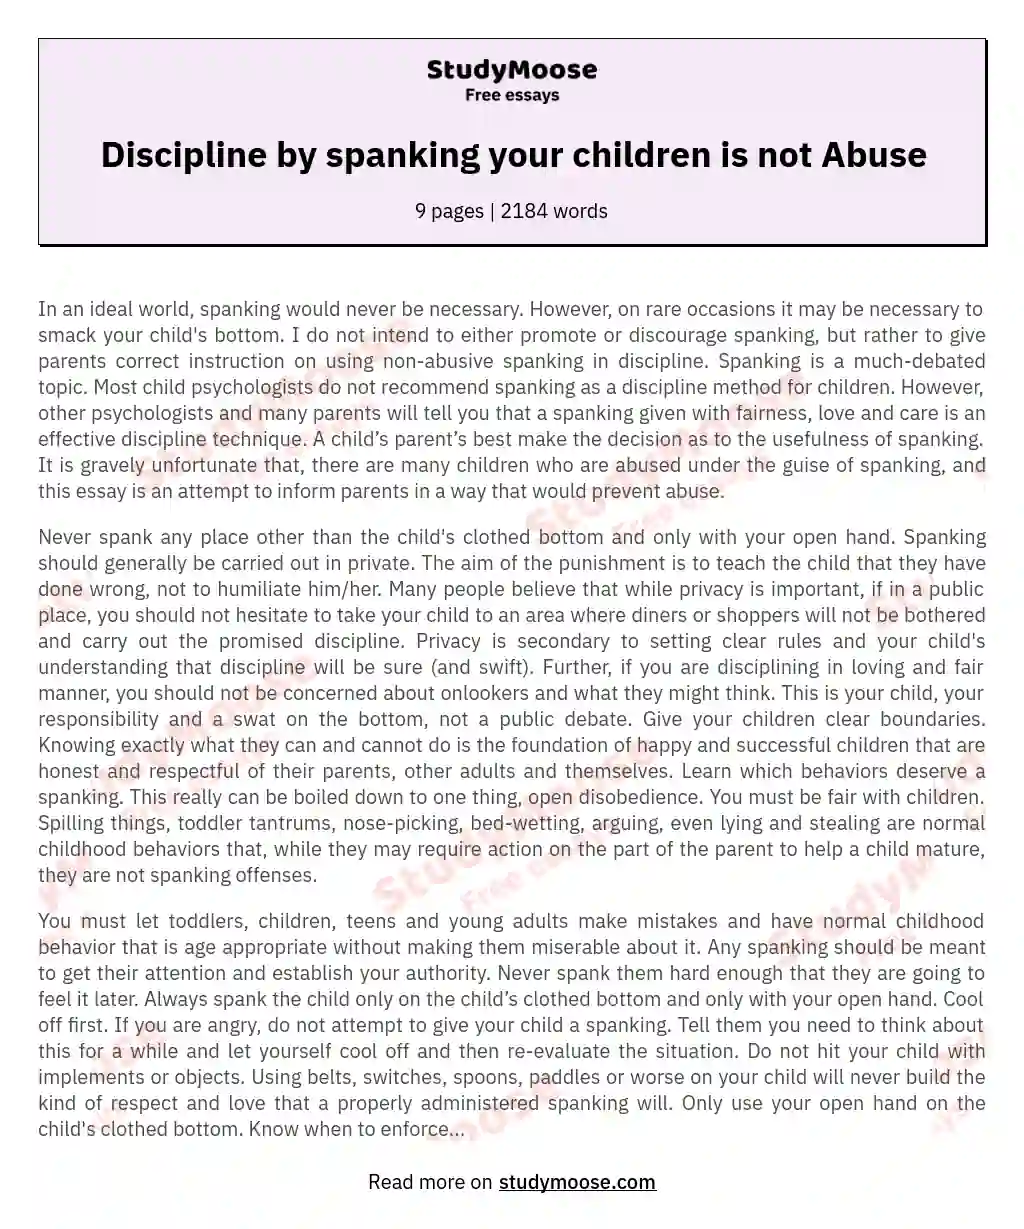 Discipline by spanking your children is not Abuse